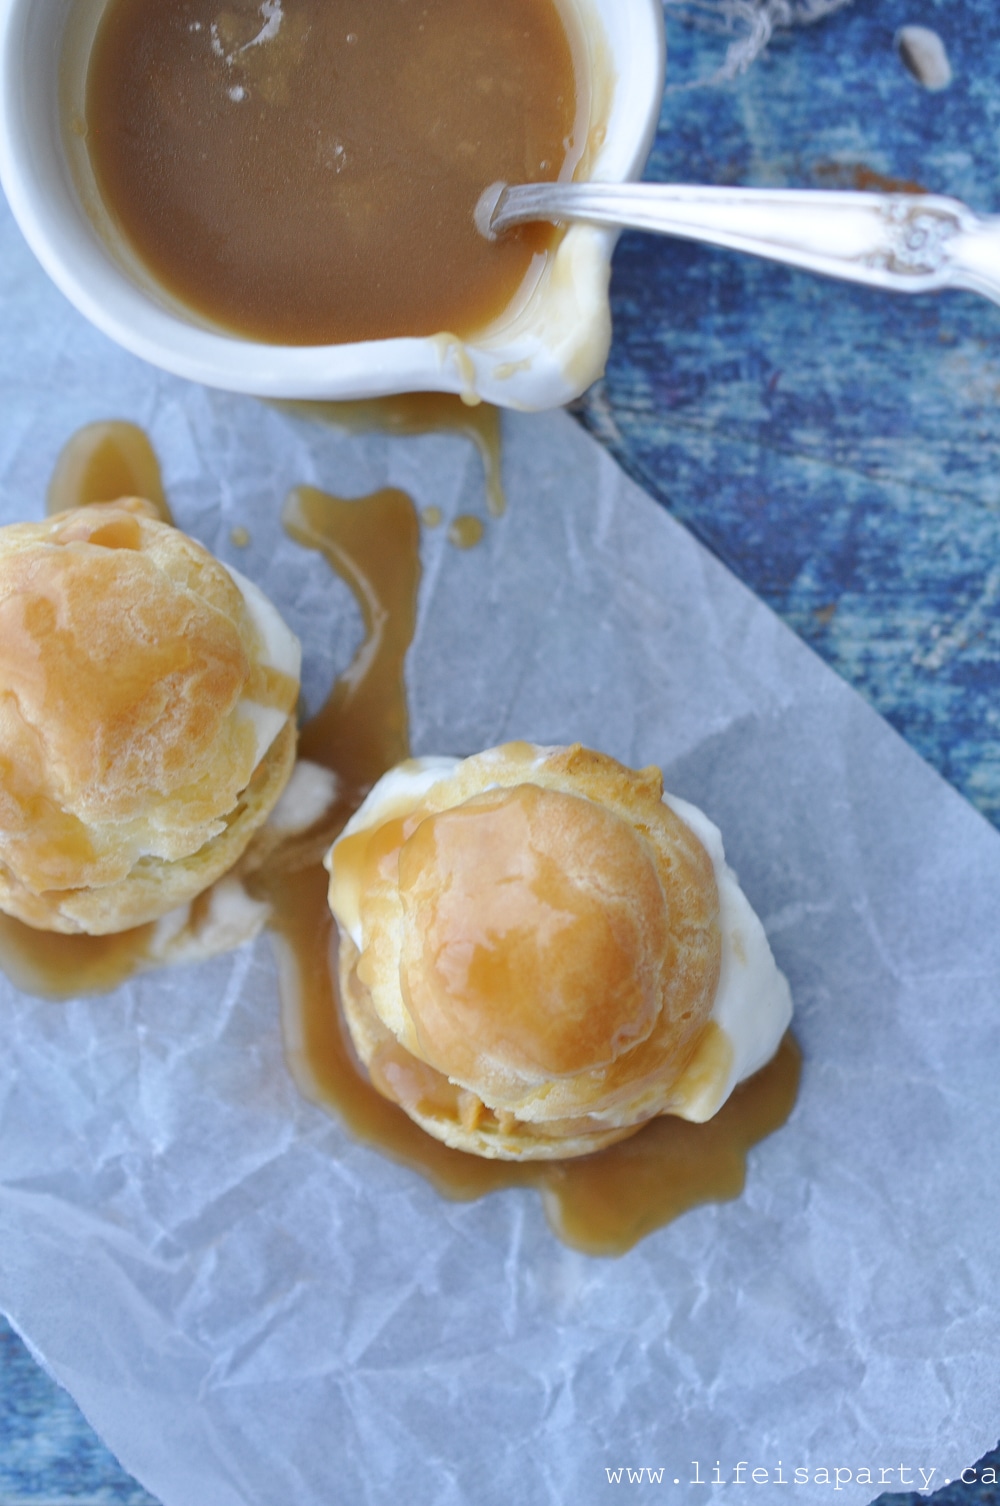 Pumpkin Cream Puffs: A cream puff filled with pumpkin pastry cream, whipped cream, and topped with warm caramel sauce for the perfect fall dessert.